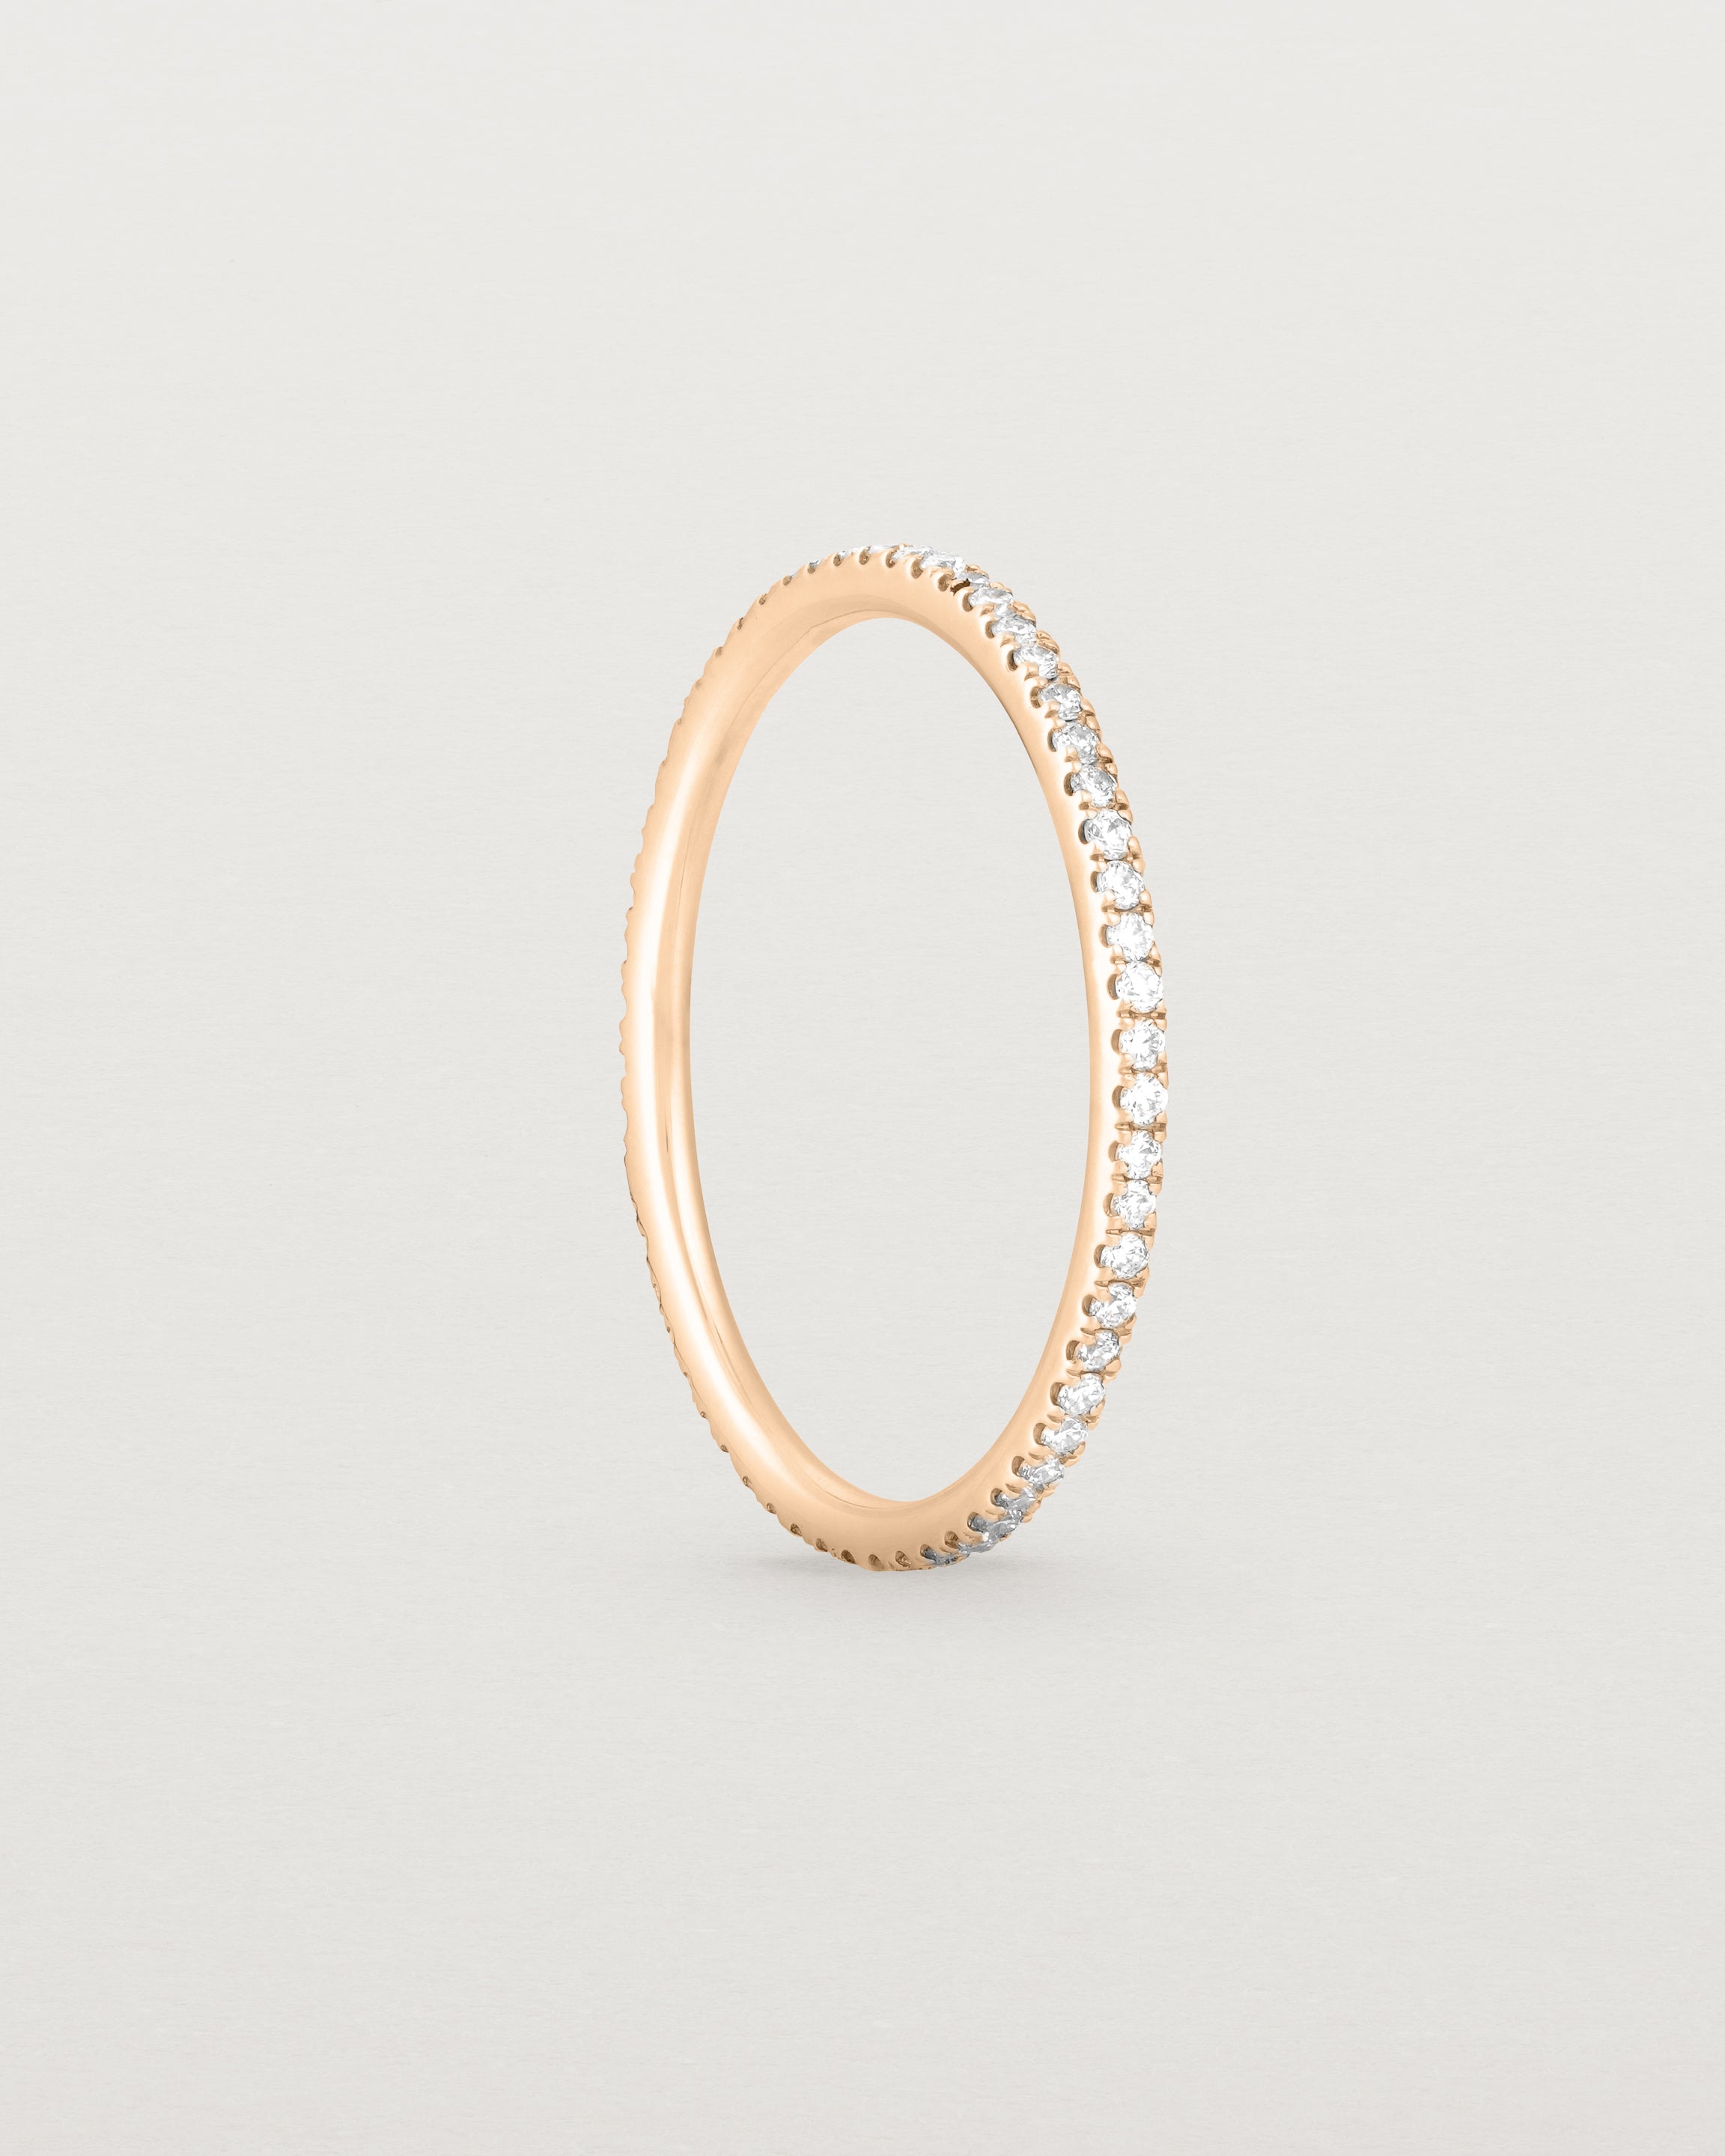 Standing view of a full rose gold band featuring white diamonds